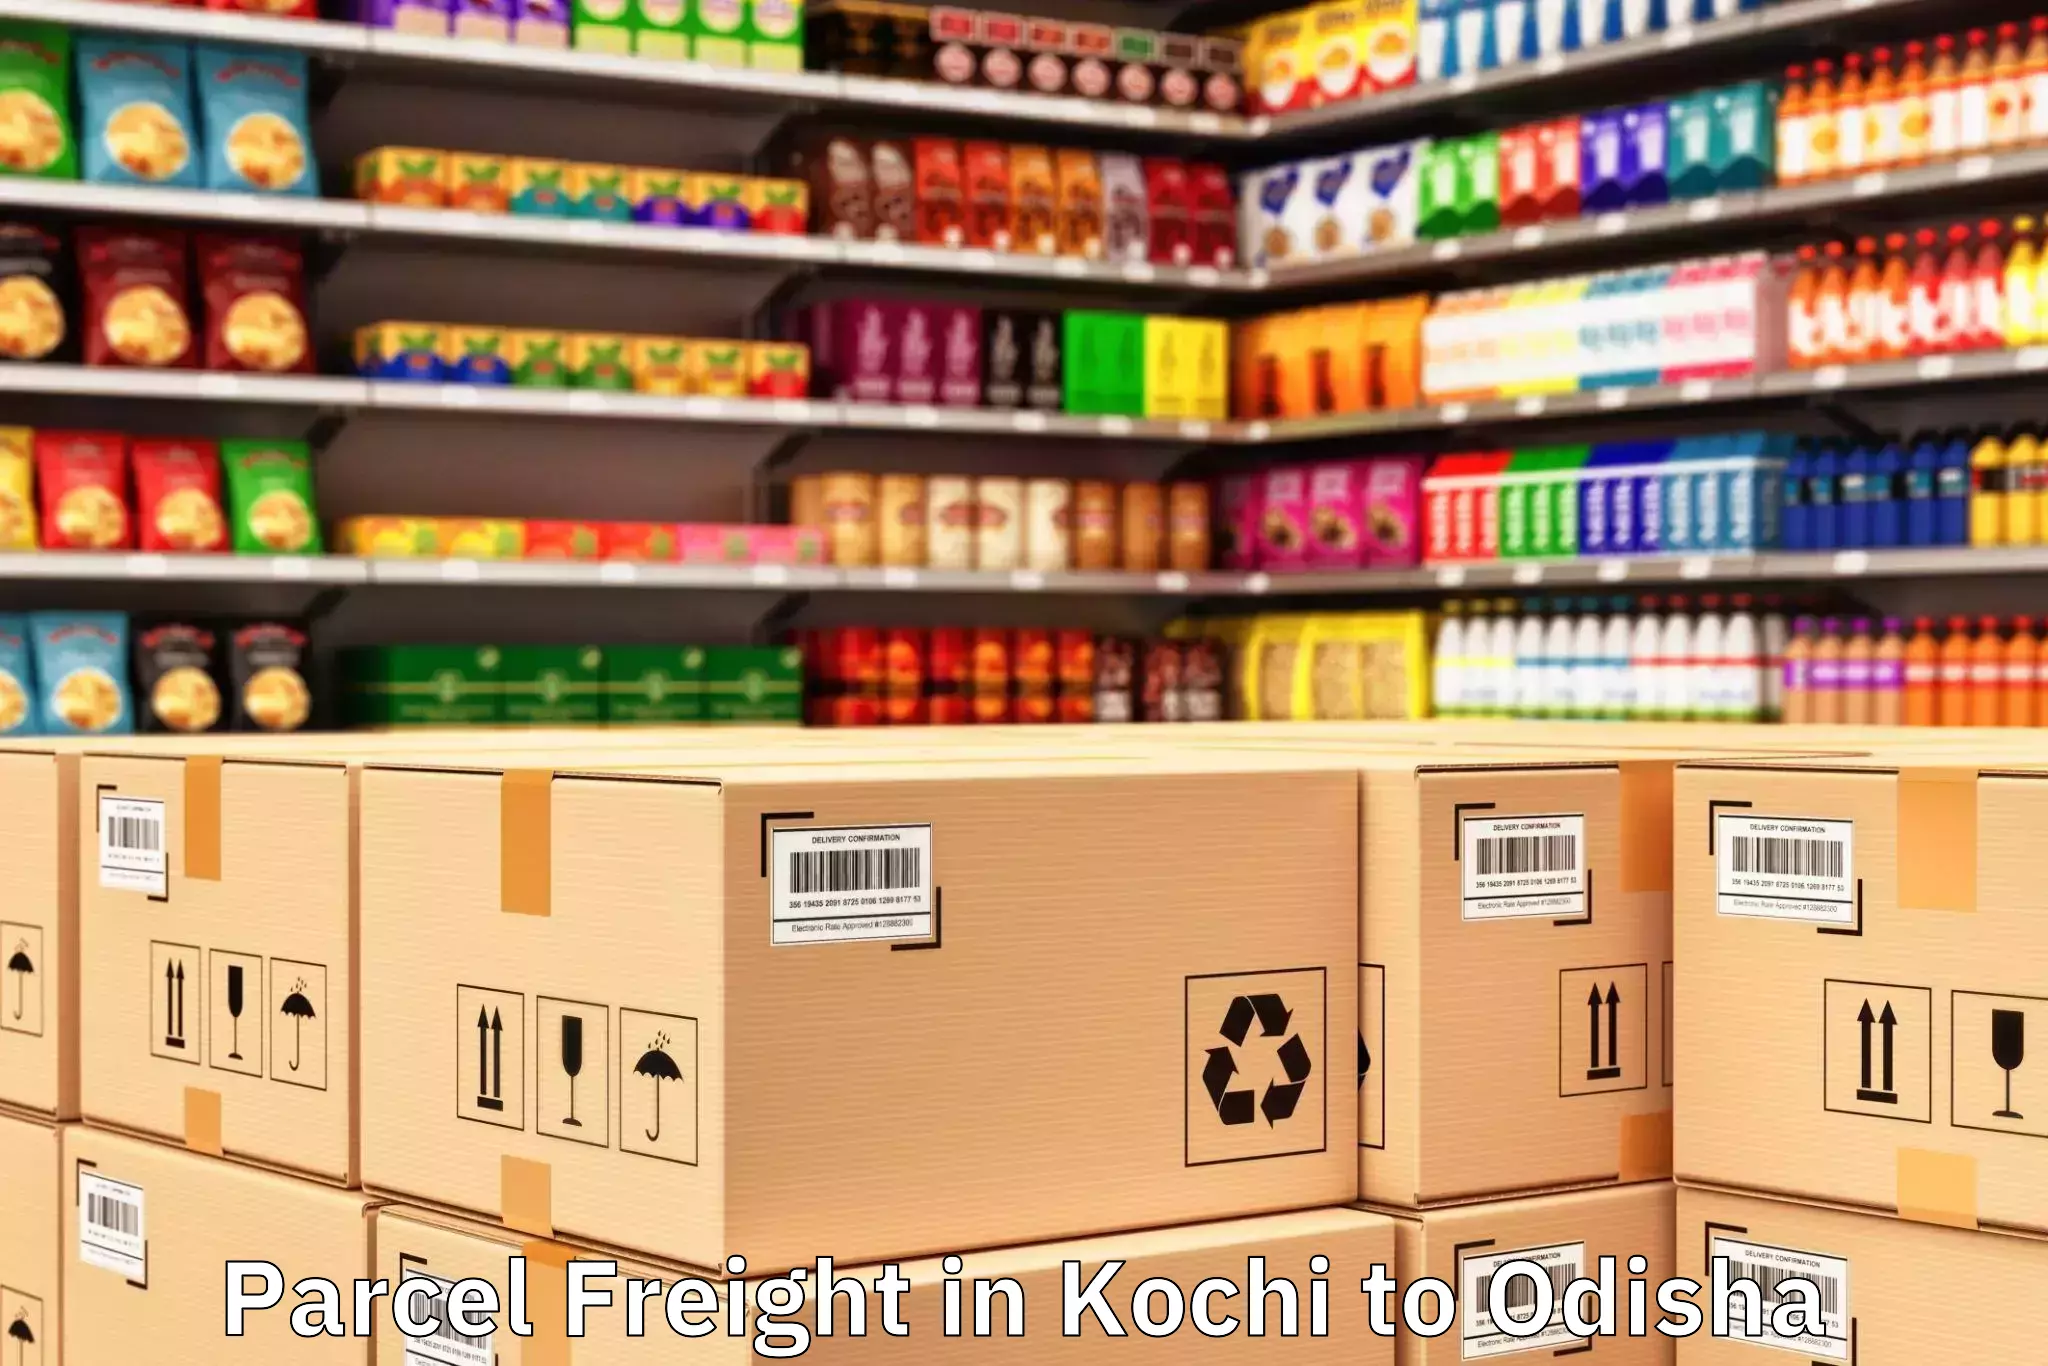 Book Your Kochi to Tangarapali Parcel Freight Today